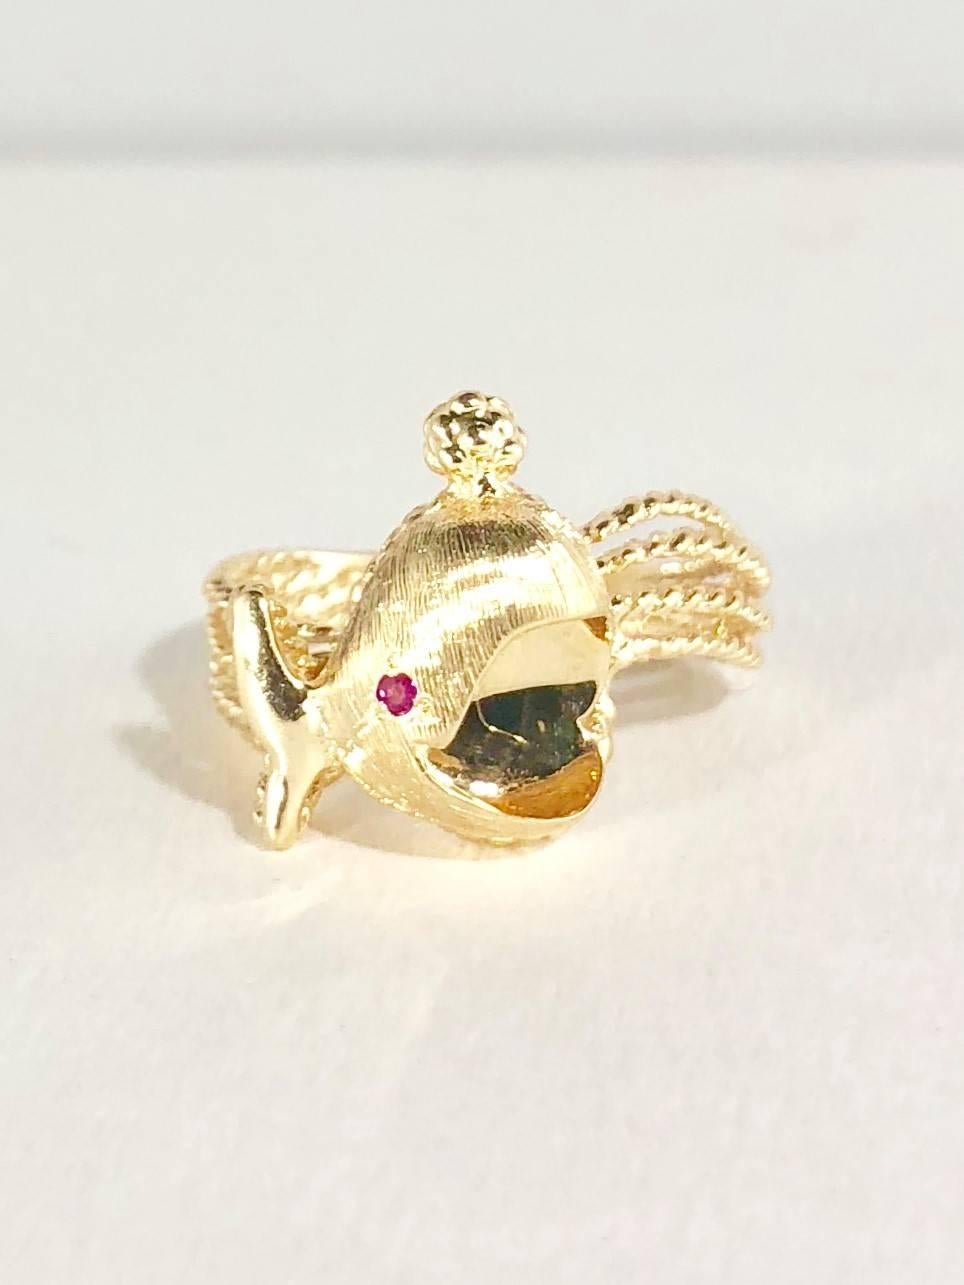 Peter Lindeman original 14 karat and Ruby Whale motif fashion ring. This ring is created in 14 karat yellow gold weighing 4.8 grams/3.1 dwt. The design includes a .02 carat total weight Ruby. This is a pre-owned modern/vintage piece. Circa 1970.